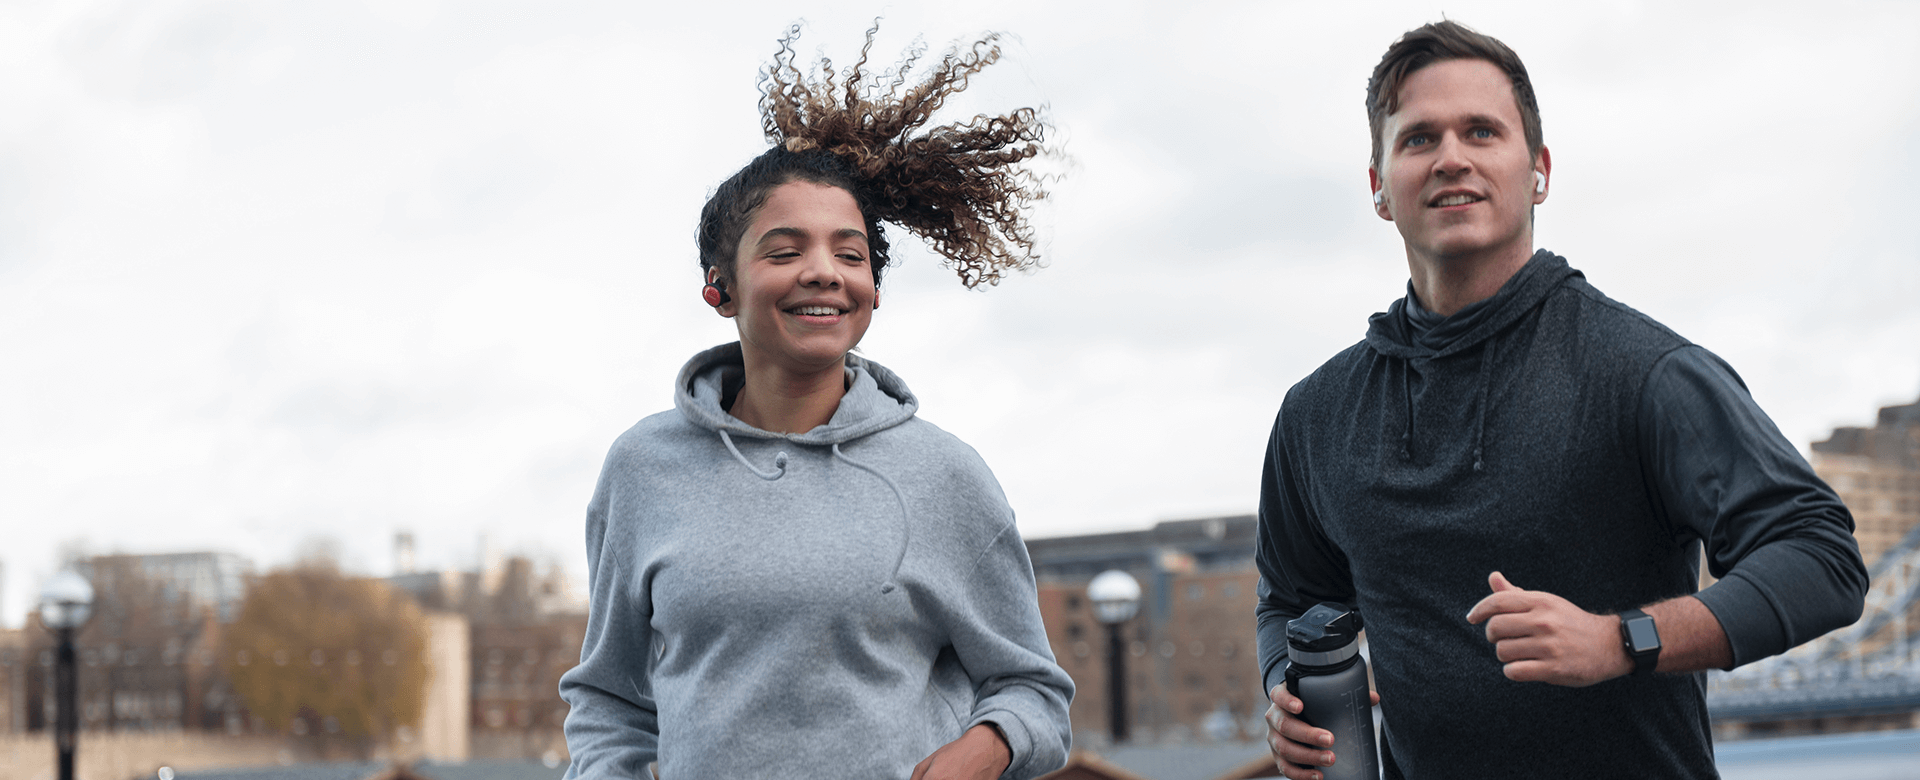 Couple Jogging - Benefits of HGH Therapy for an Active Lifestyle